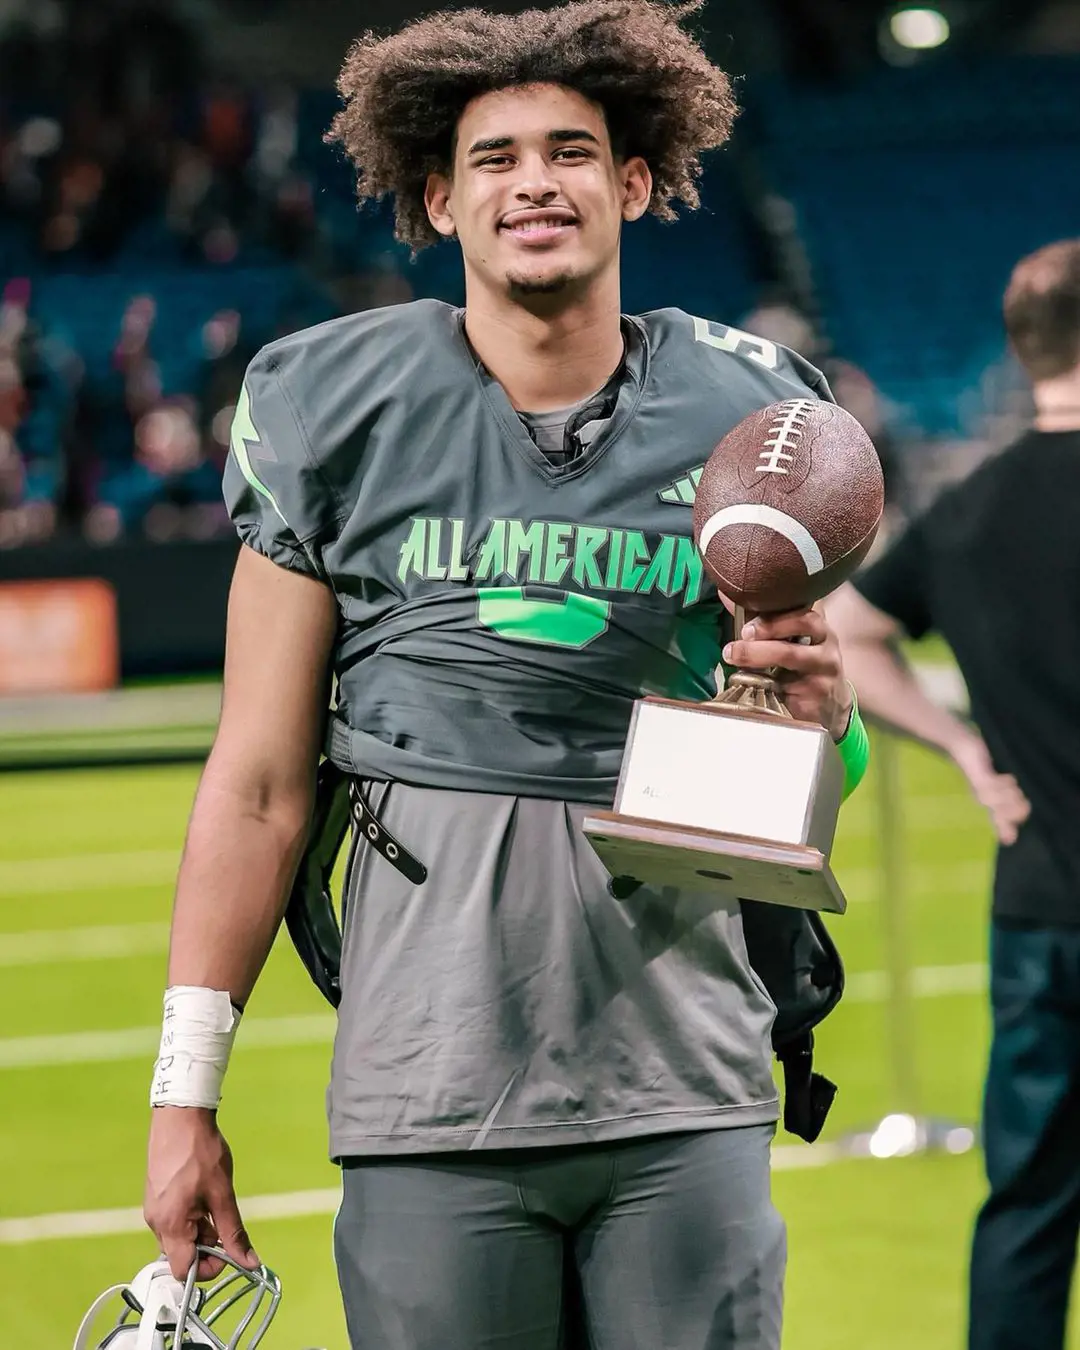 Dante is an American football quarterback. He played in the 2023 All-American Bowl.